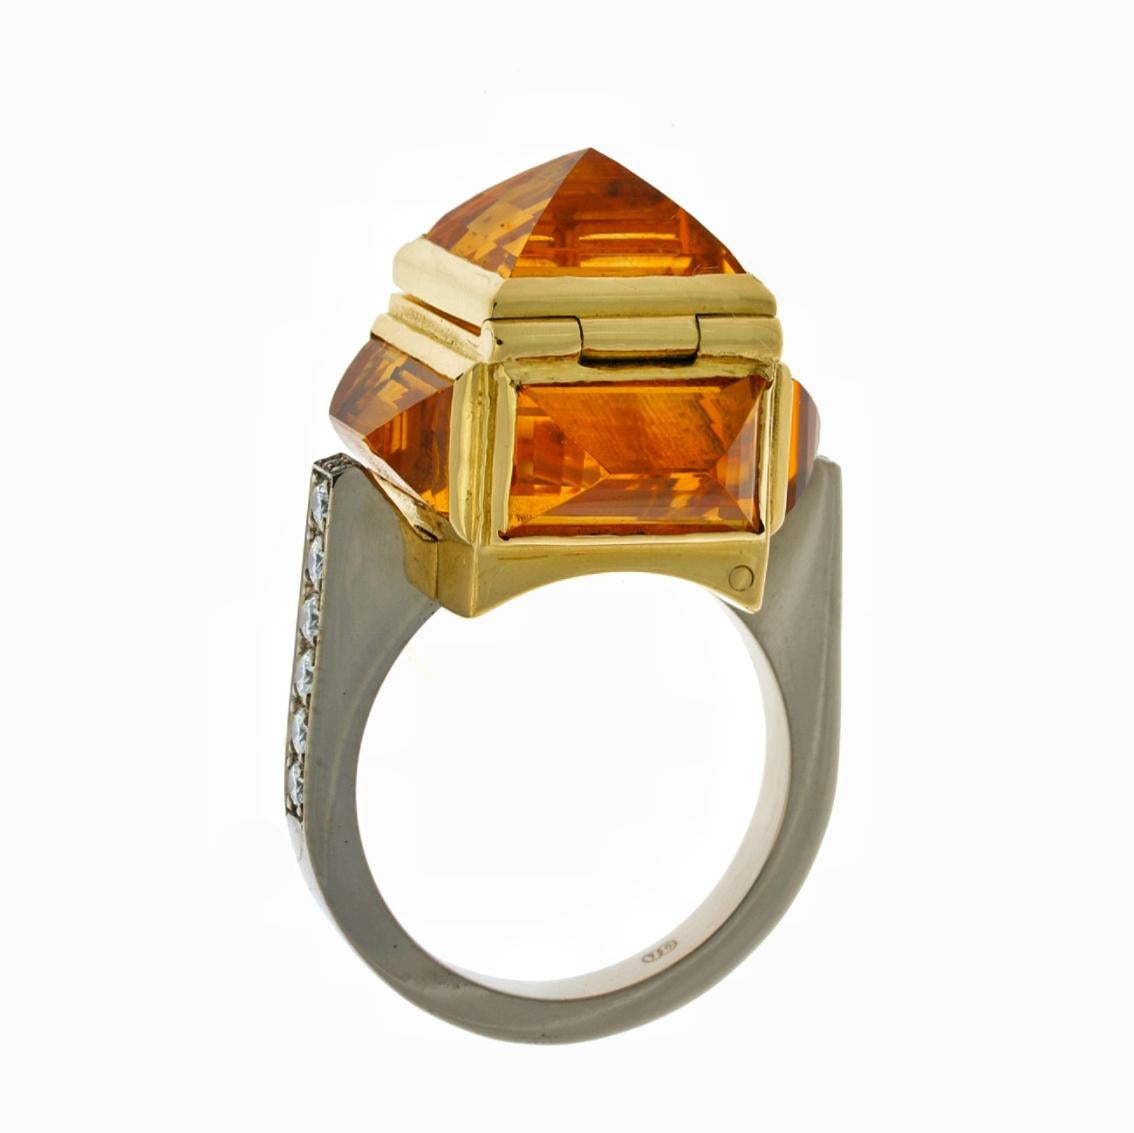 Exquisitely handcrafted in 18kt yellow and white gold, the Brutalist Chamber Ring's design is a stunning brutalist twist on the poison rings of old. It features a latched chamber fashioned from 5 vibrant citrines (totalling 23.05cts). The result is